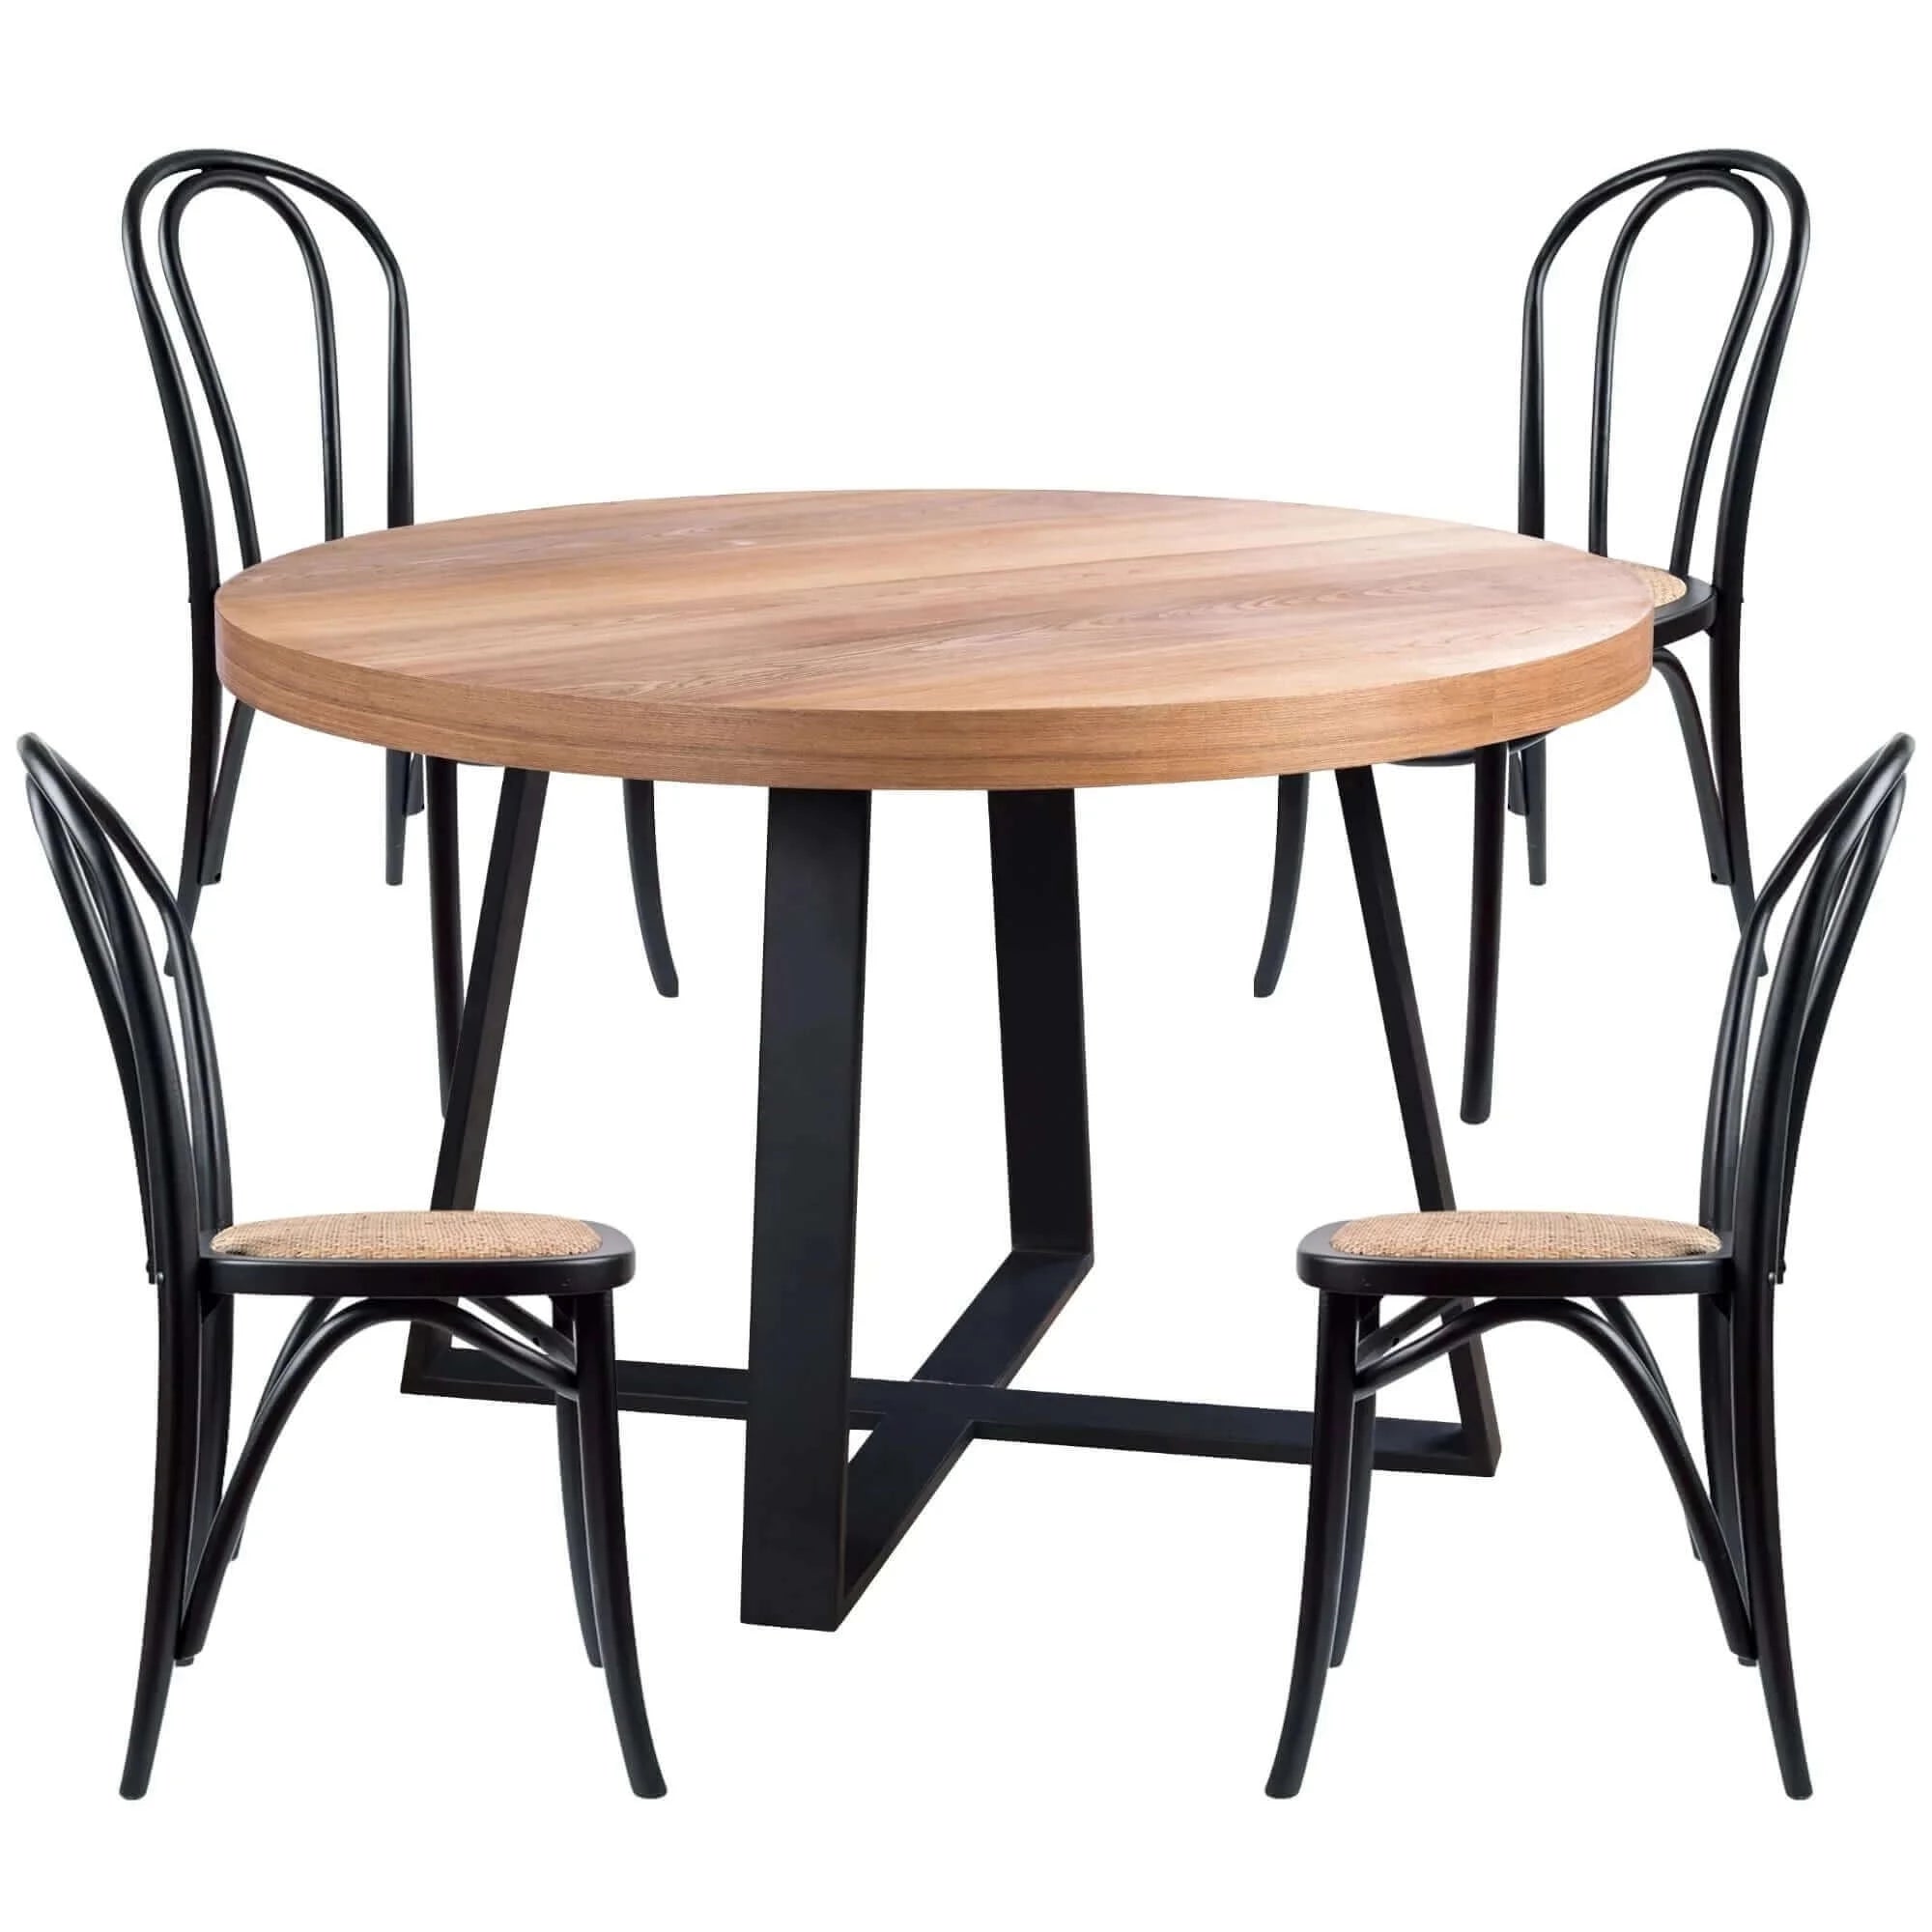 Buy petunia 5pc 120cm round dining table set 4 arched back chair elm timber wood - upinteriors-Upinteriors